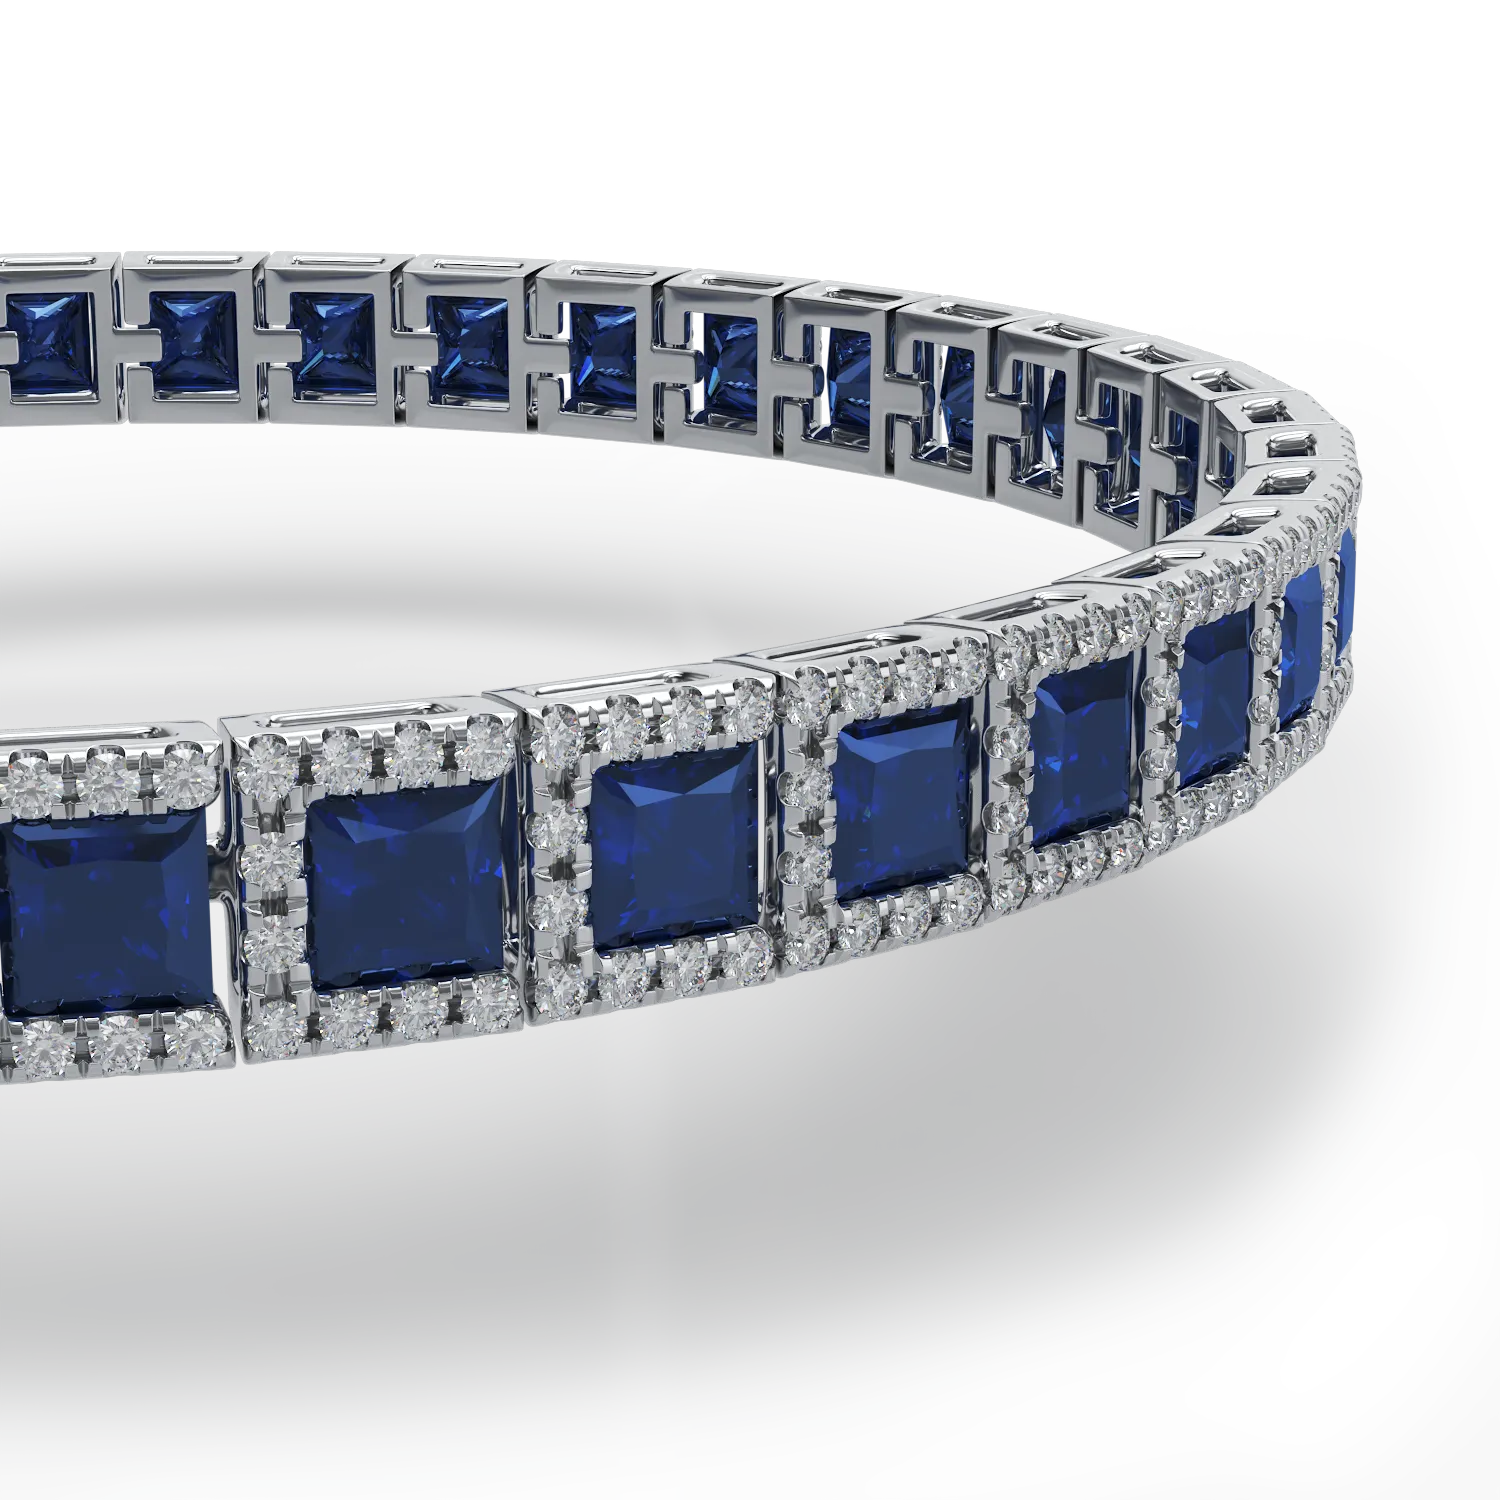 18K white gold tennis bracelet with 7.18ct sapphires and 1.75ct diamonds